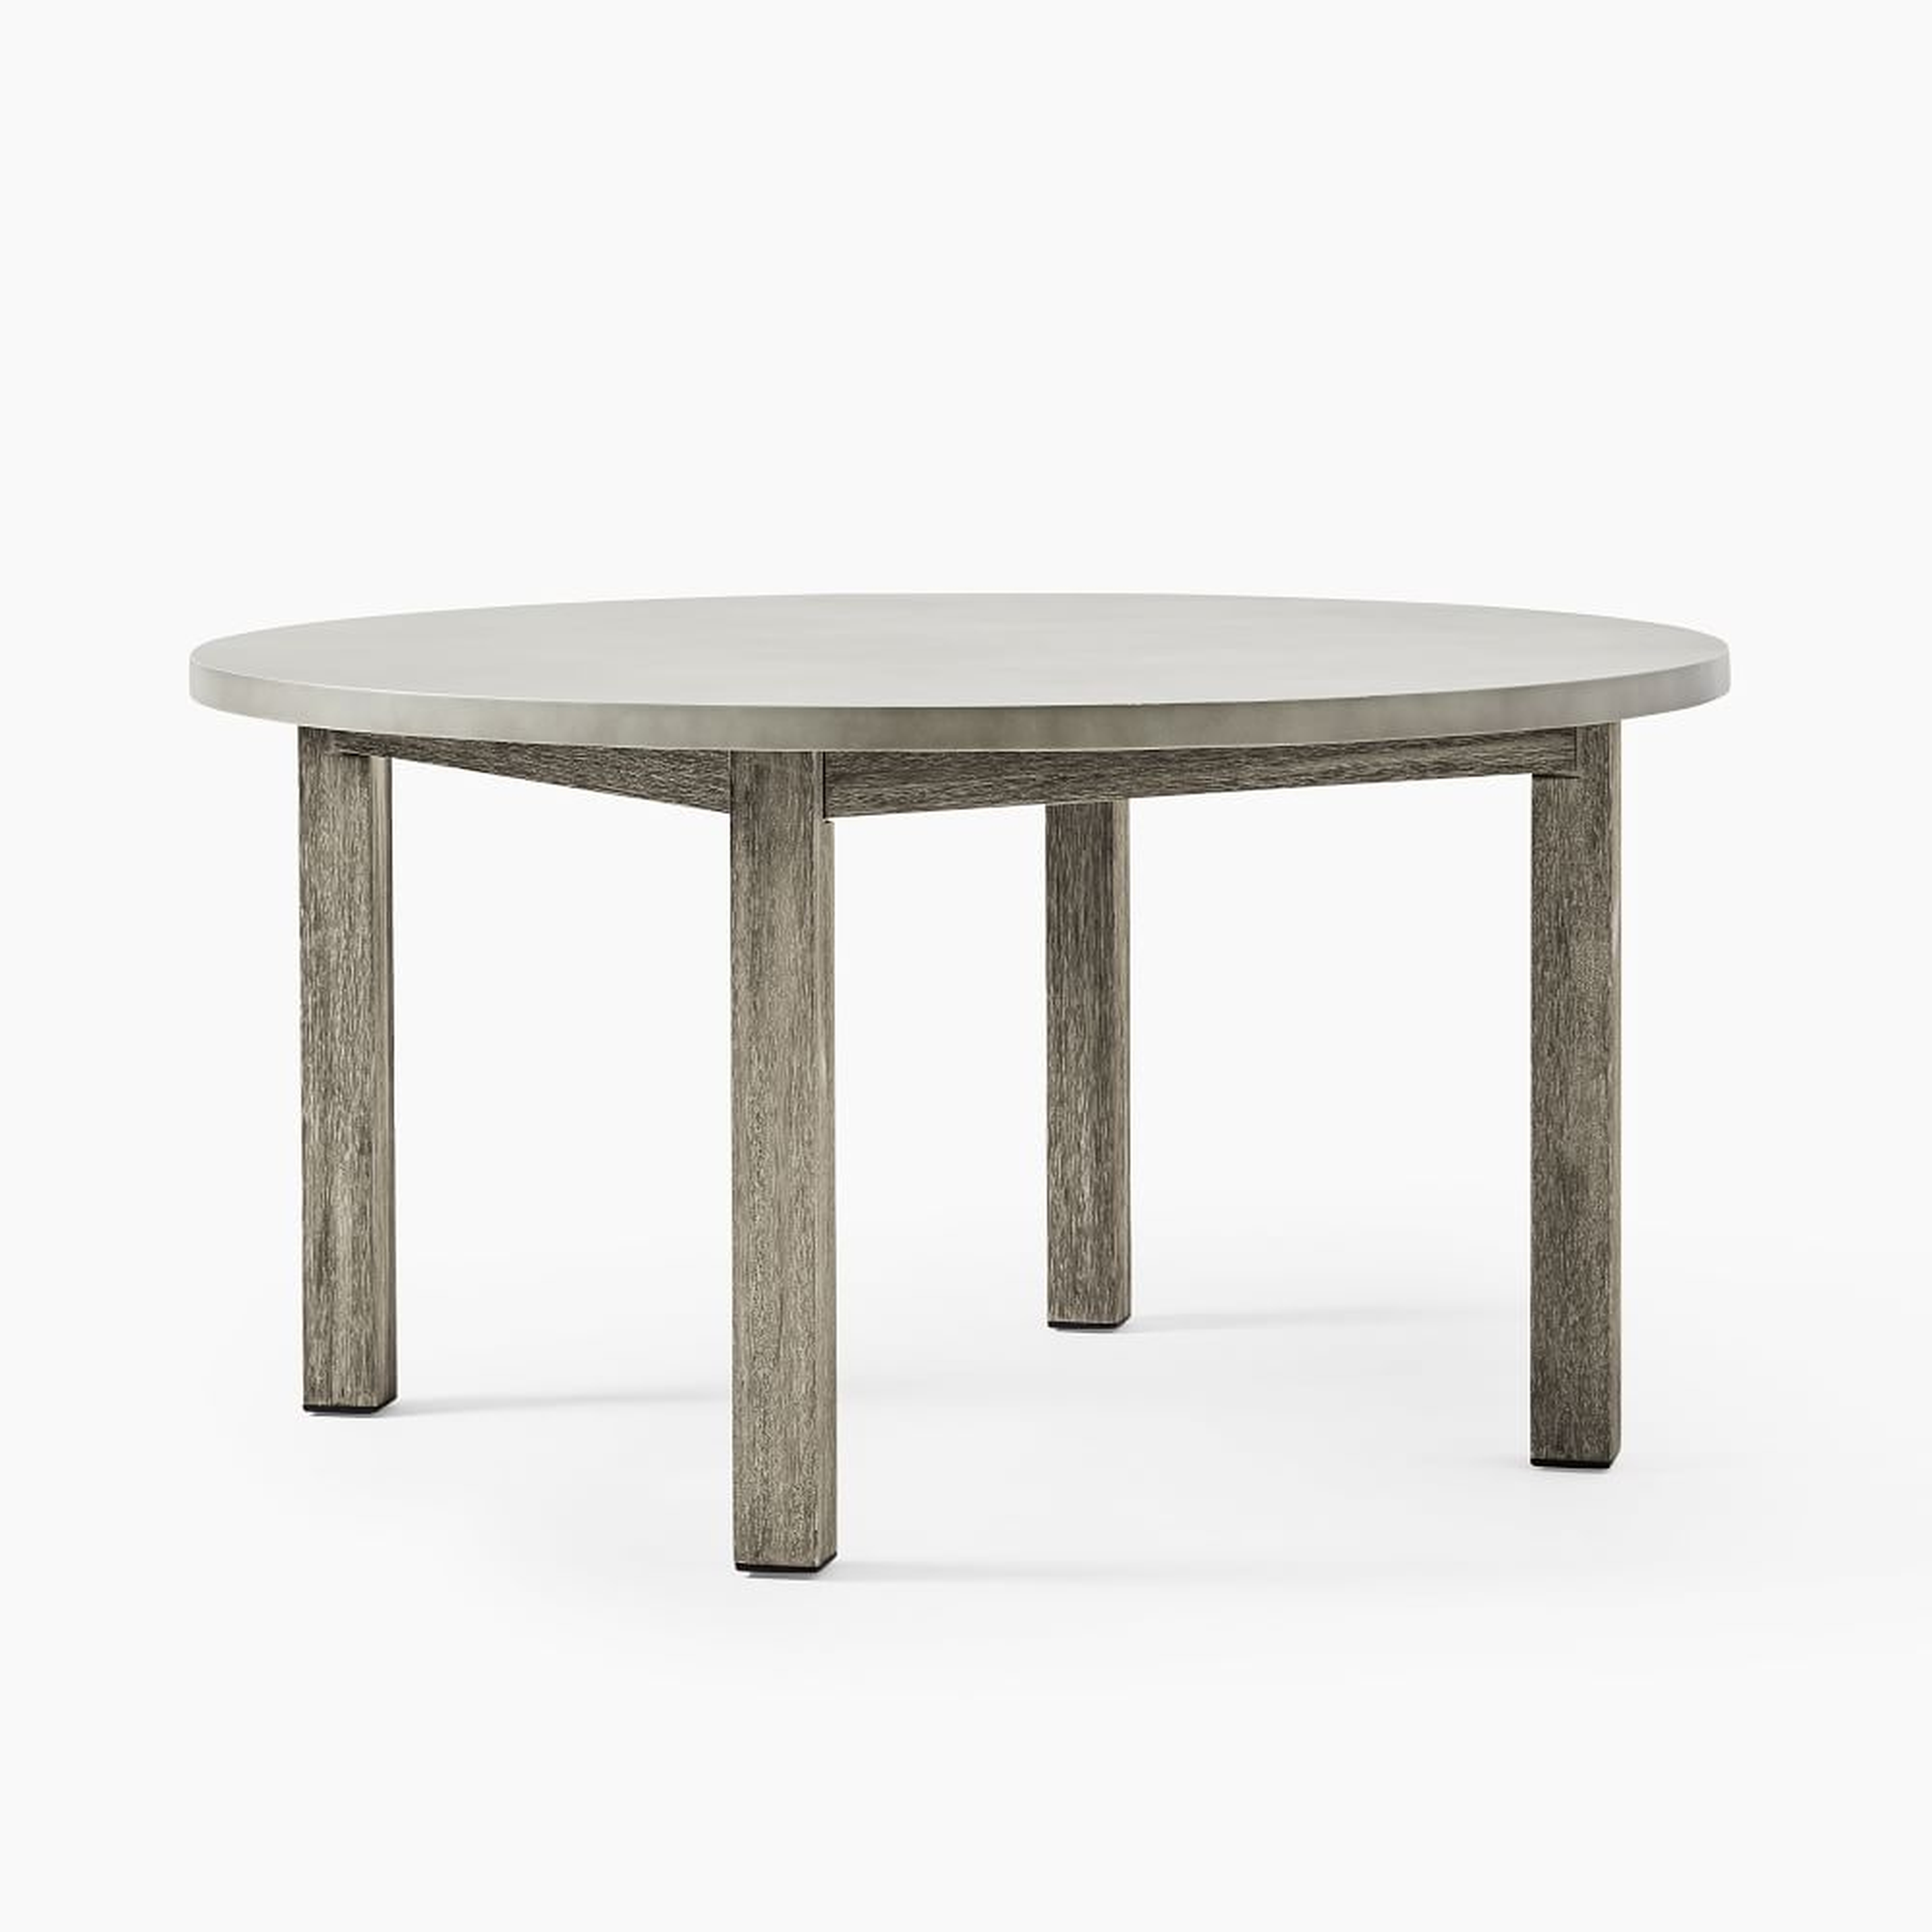 Portside Outdoor Concrete 60 in Round Dining Table, Weathered Gray - West Elm